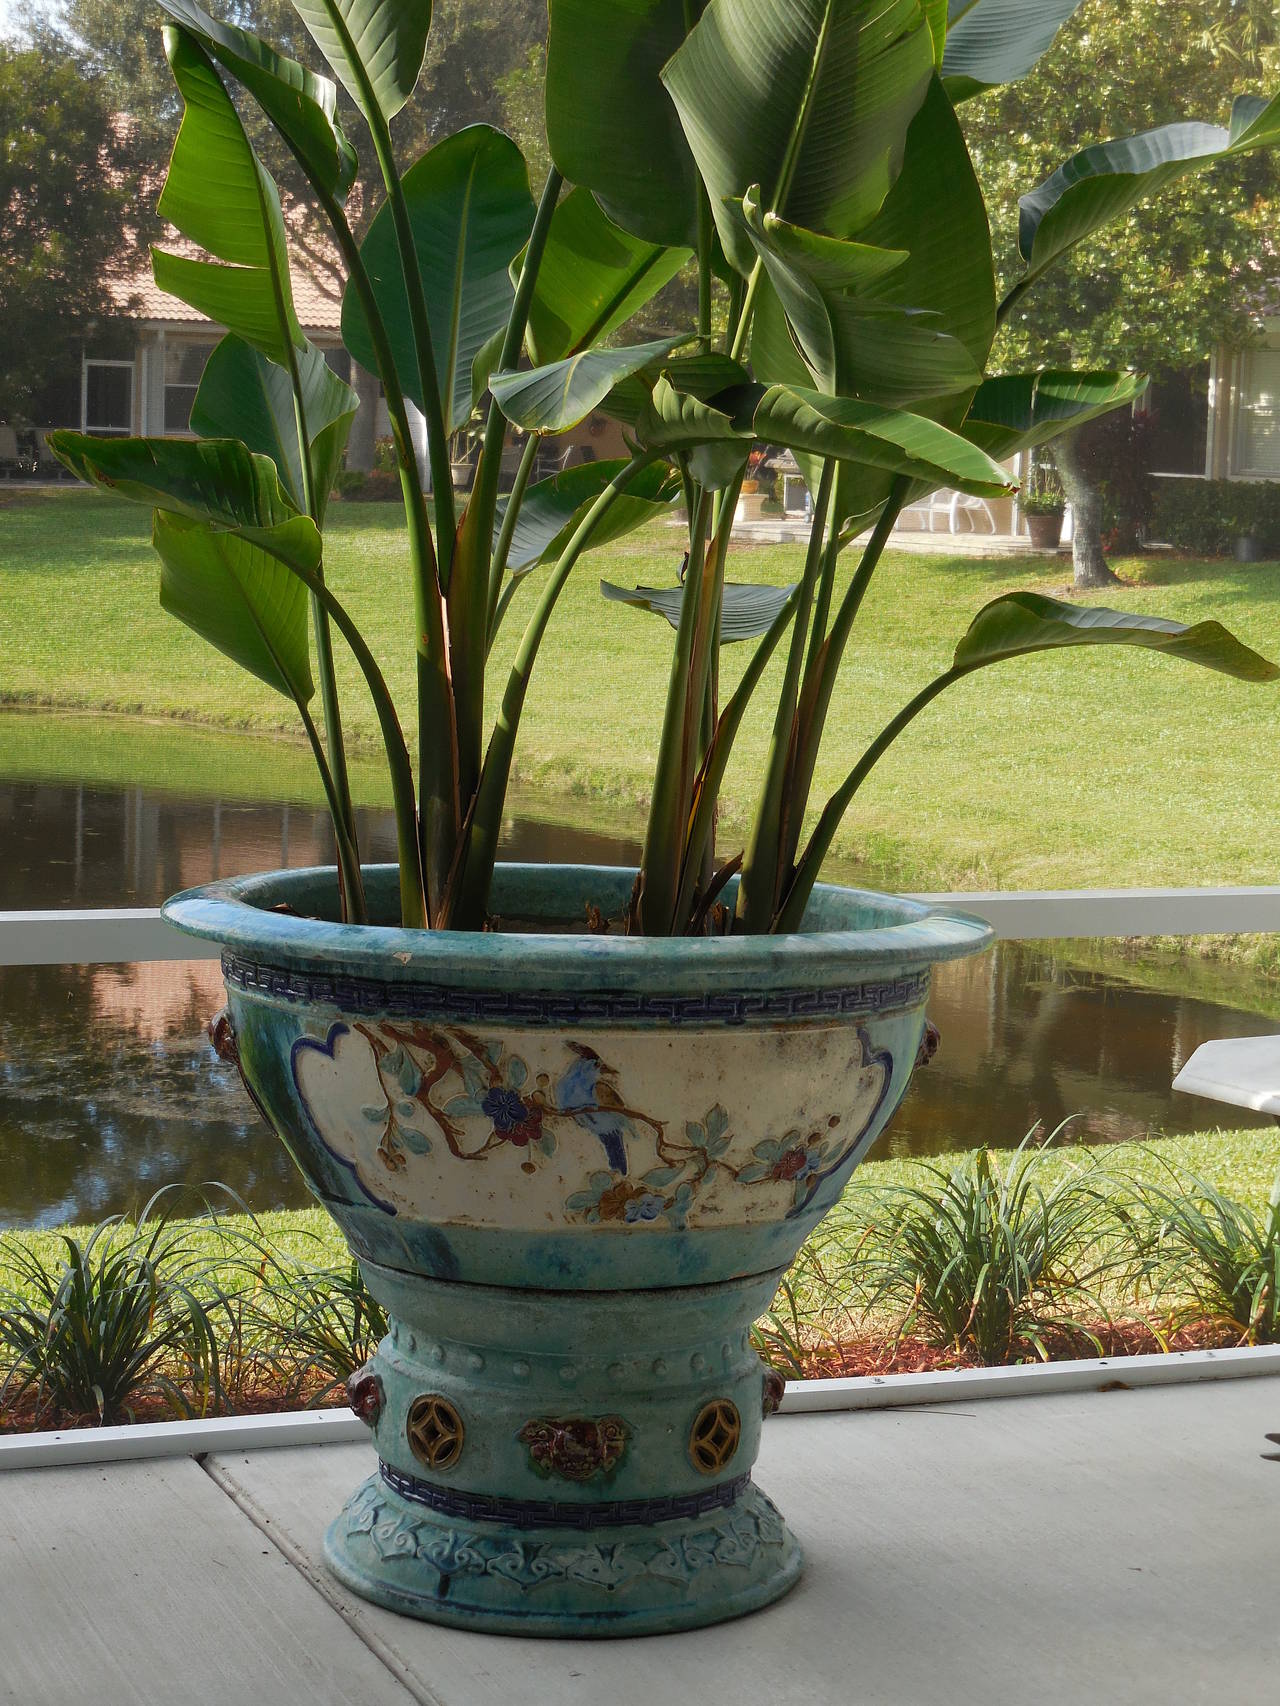 Beautiful ceramic planter made of two separate pieces, base and large round top. Both surrounded with garden plants and floral motif, round circle border, bird
and Foo dog.
Unusual colors texture with dominant turquoise.
Could be used